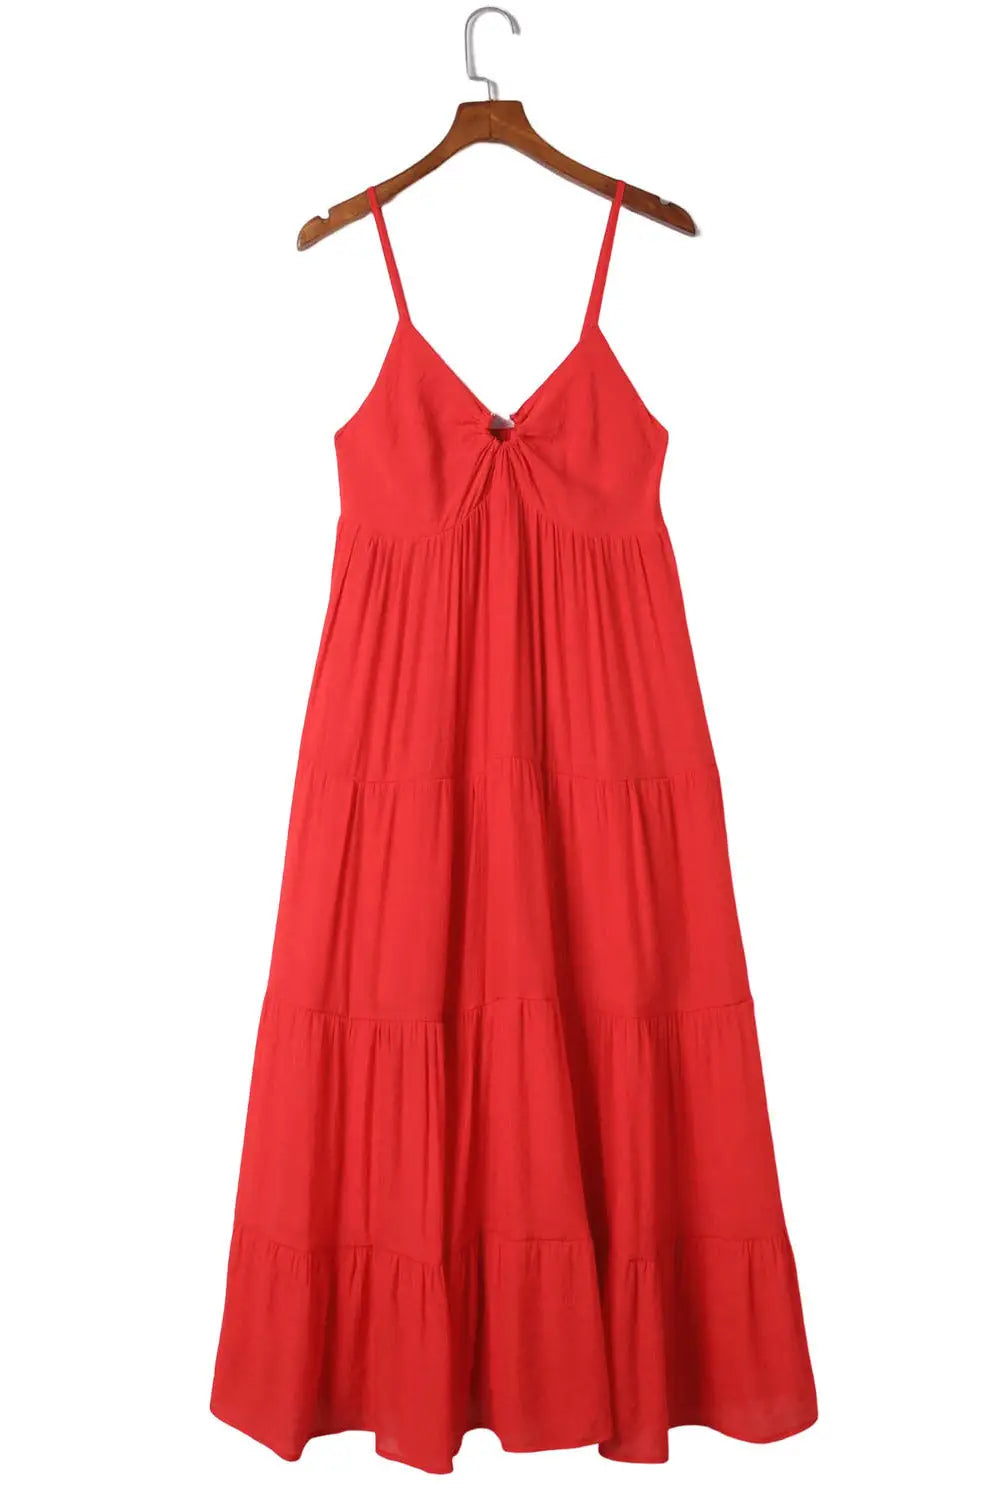 Red o-ring smocked back spaghetti straps tiered maxi dress - dresses